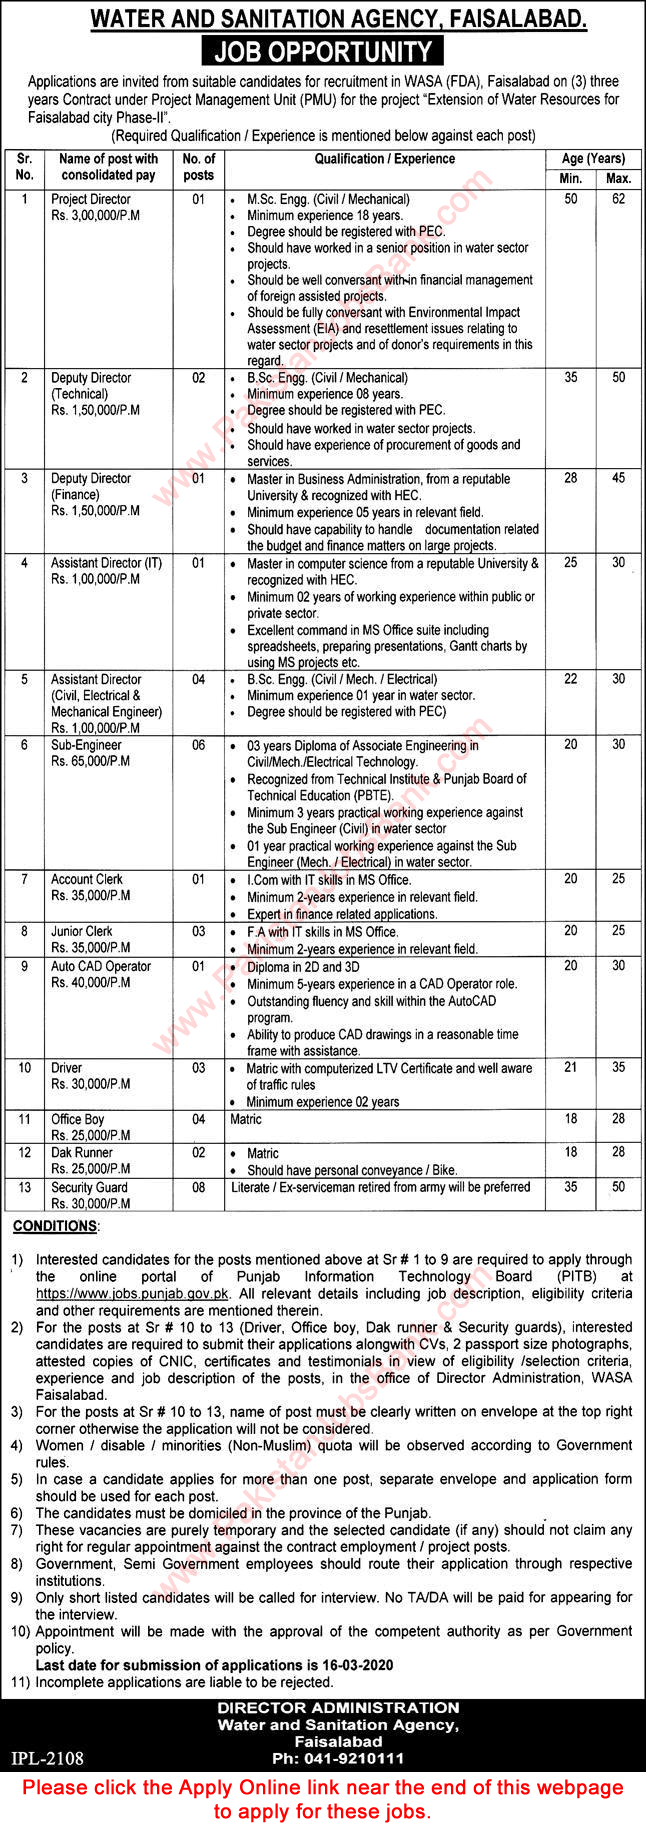 WASA Faisalabad Jobs 2020 February / March Apply Online Water and Sanitation Agency Latest